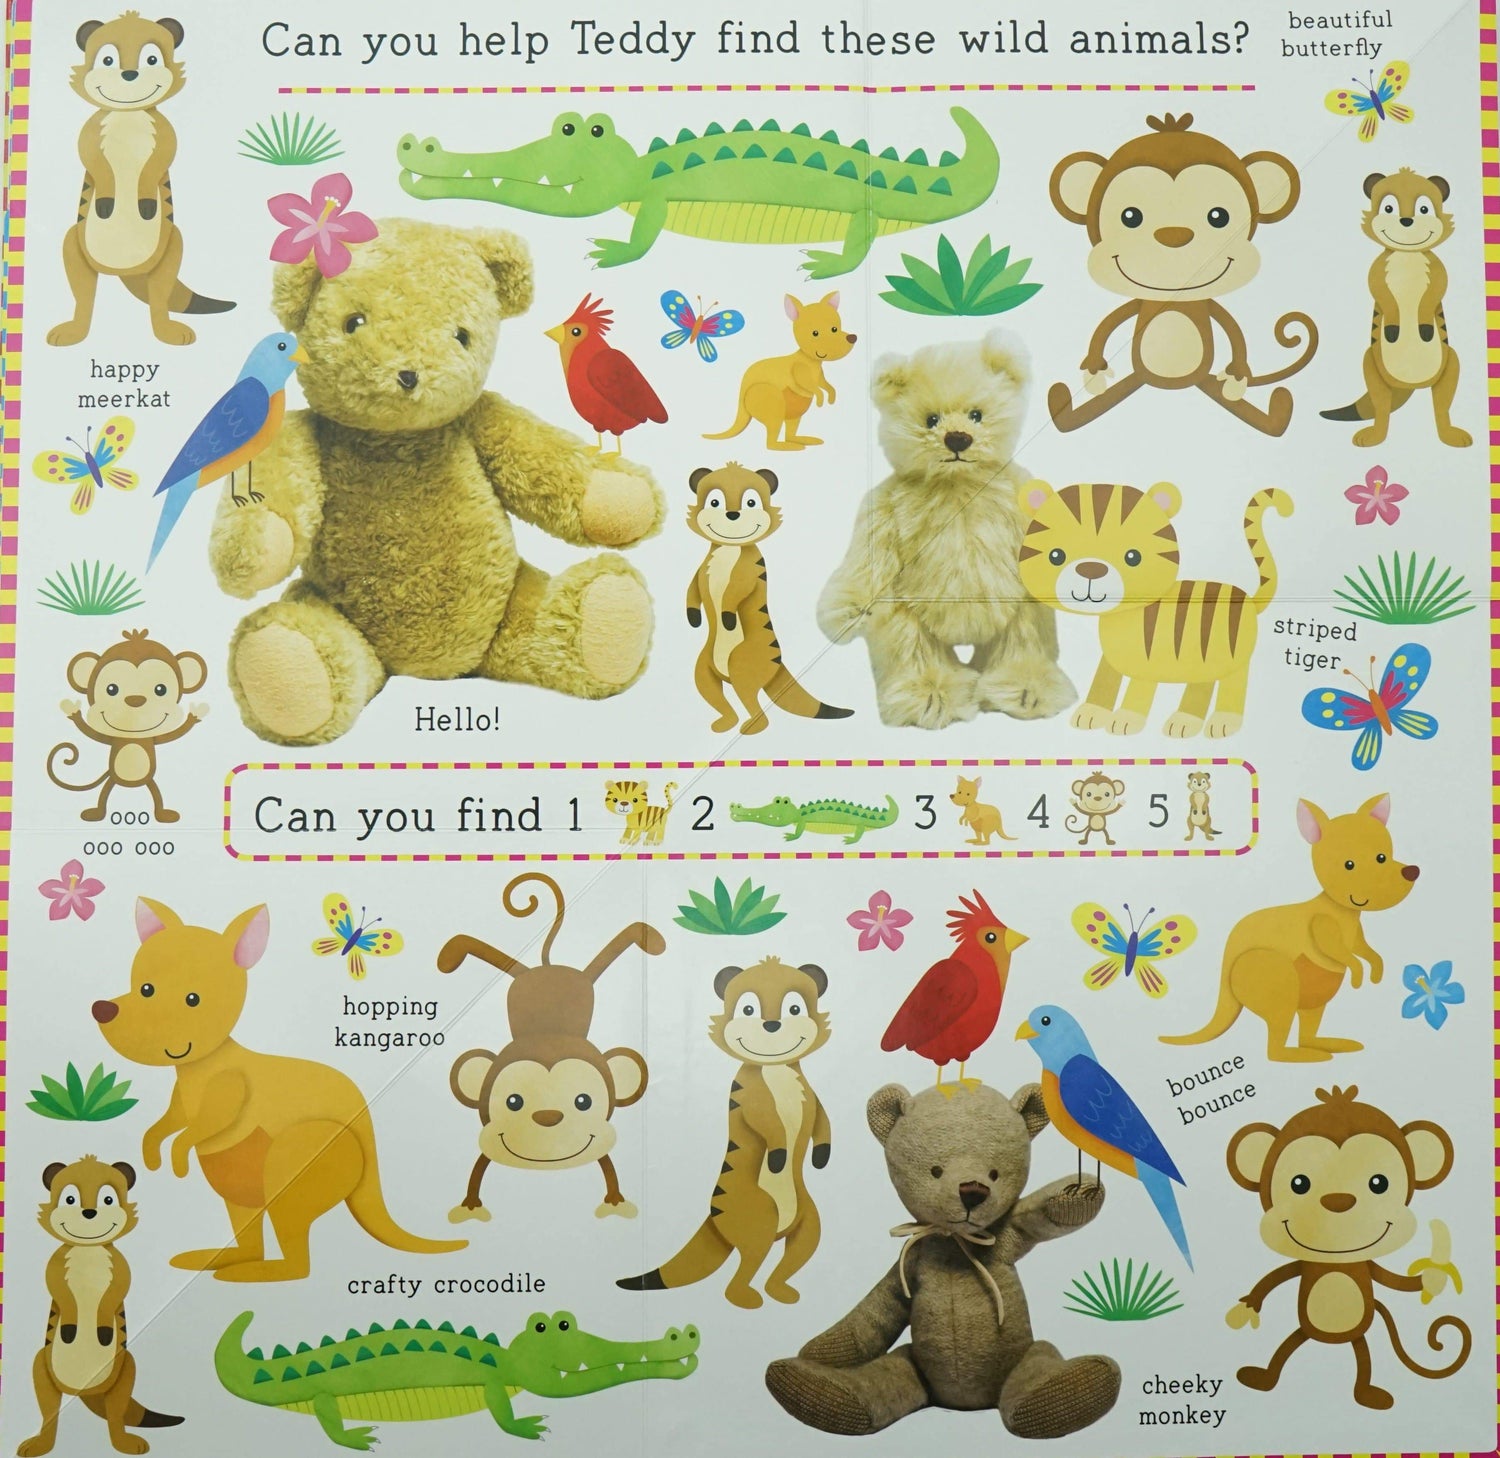 Find With Teddy Animals